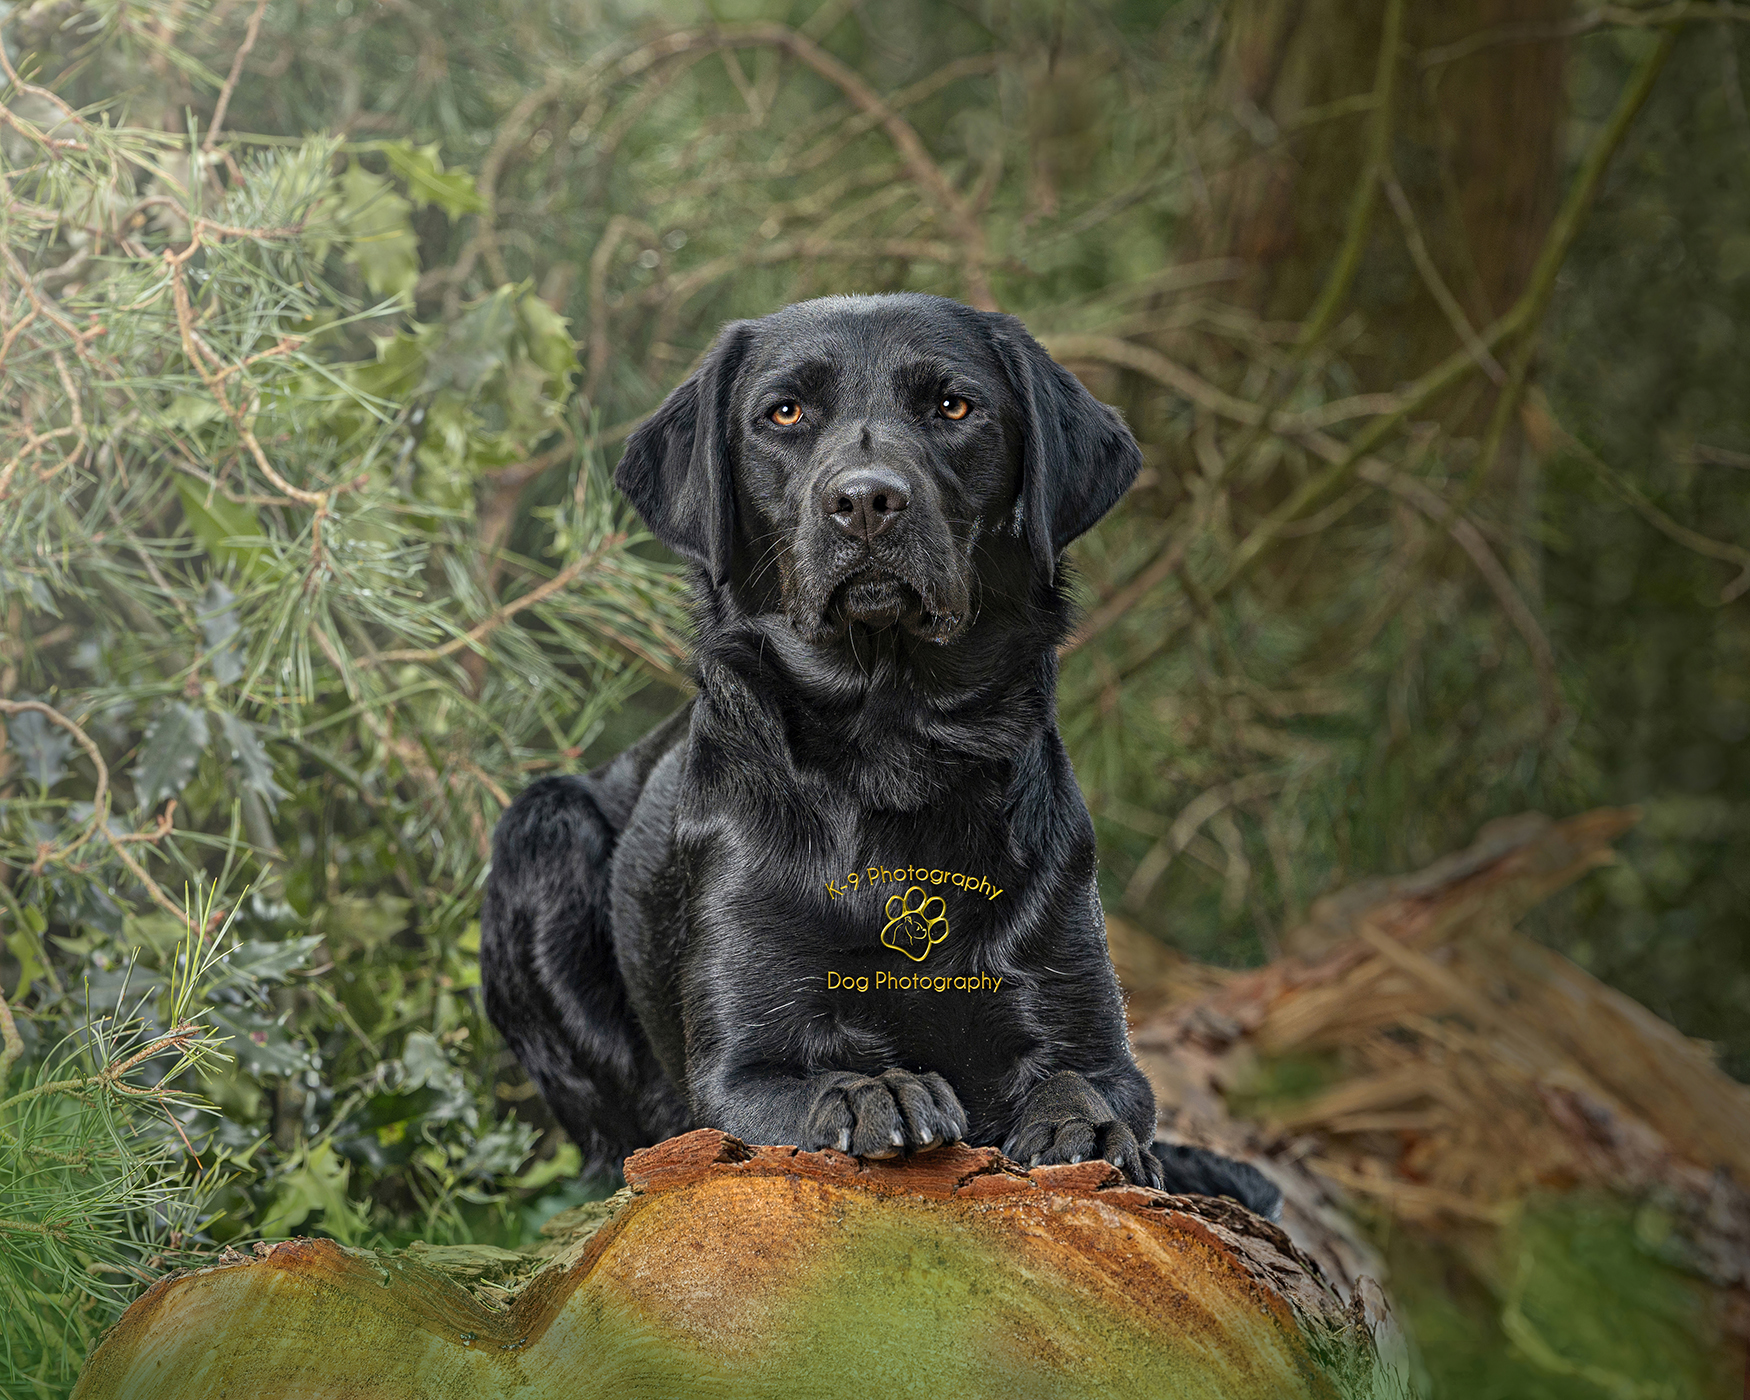 Black Labrador Dog photography by dog photographer Adrian Bullers